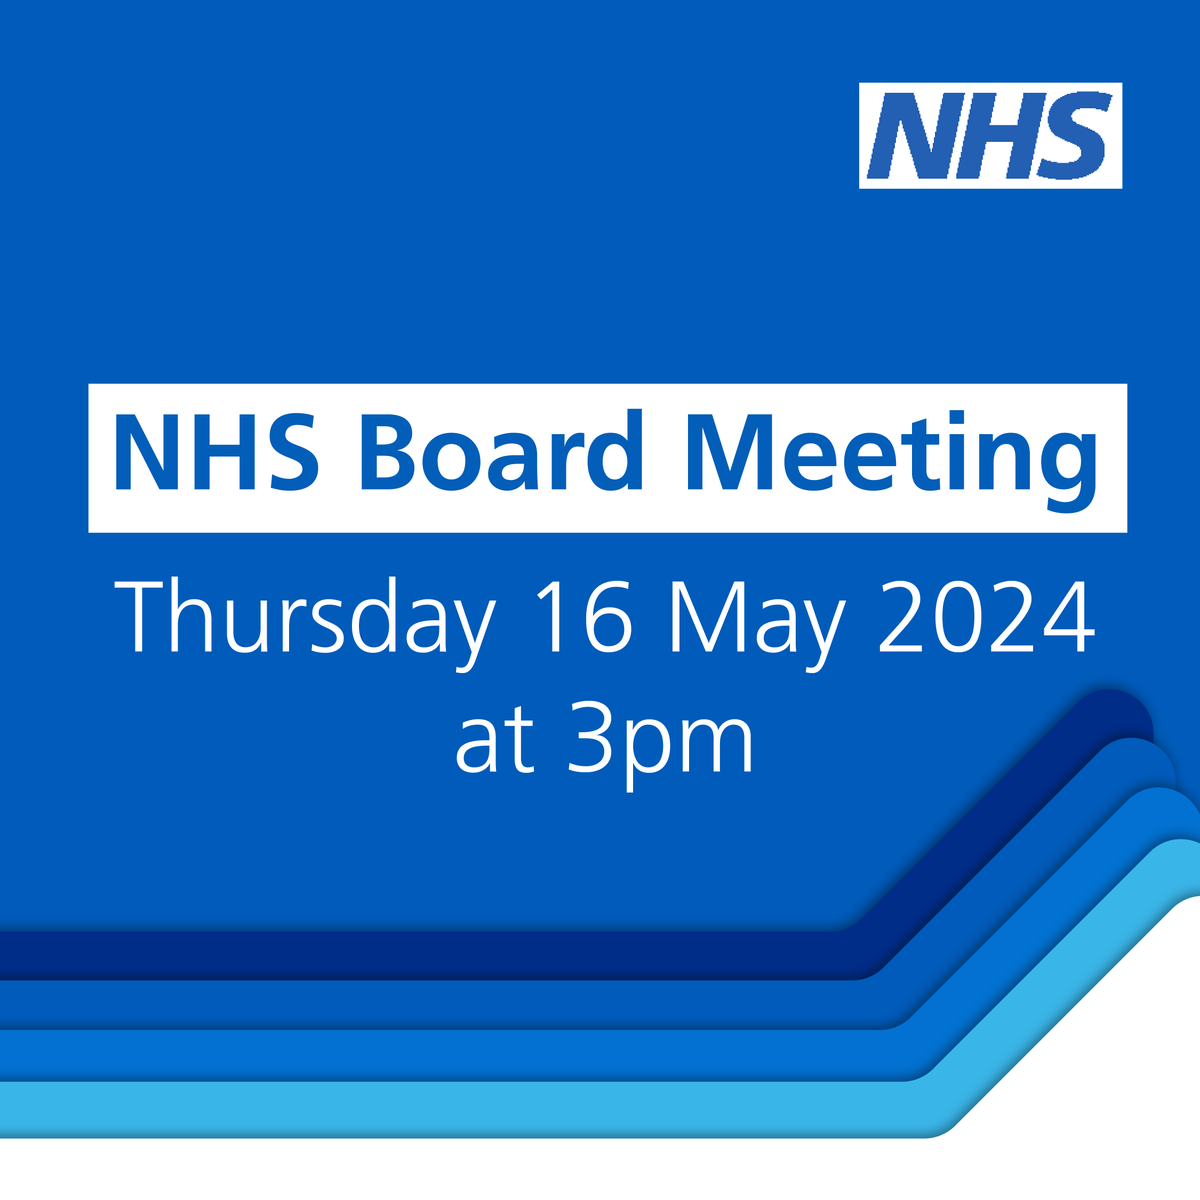 We’ll be live streaming our next #NHSBoard meeting today at 3pm. You can find the agenda, board papers and link to watch the public session on our website. england.nhs.uk/about/nhs-engl…